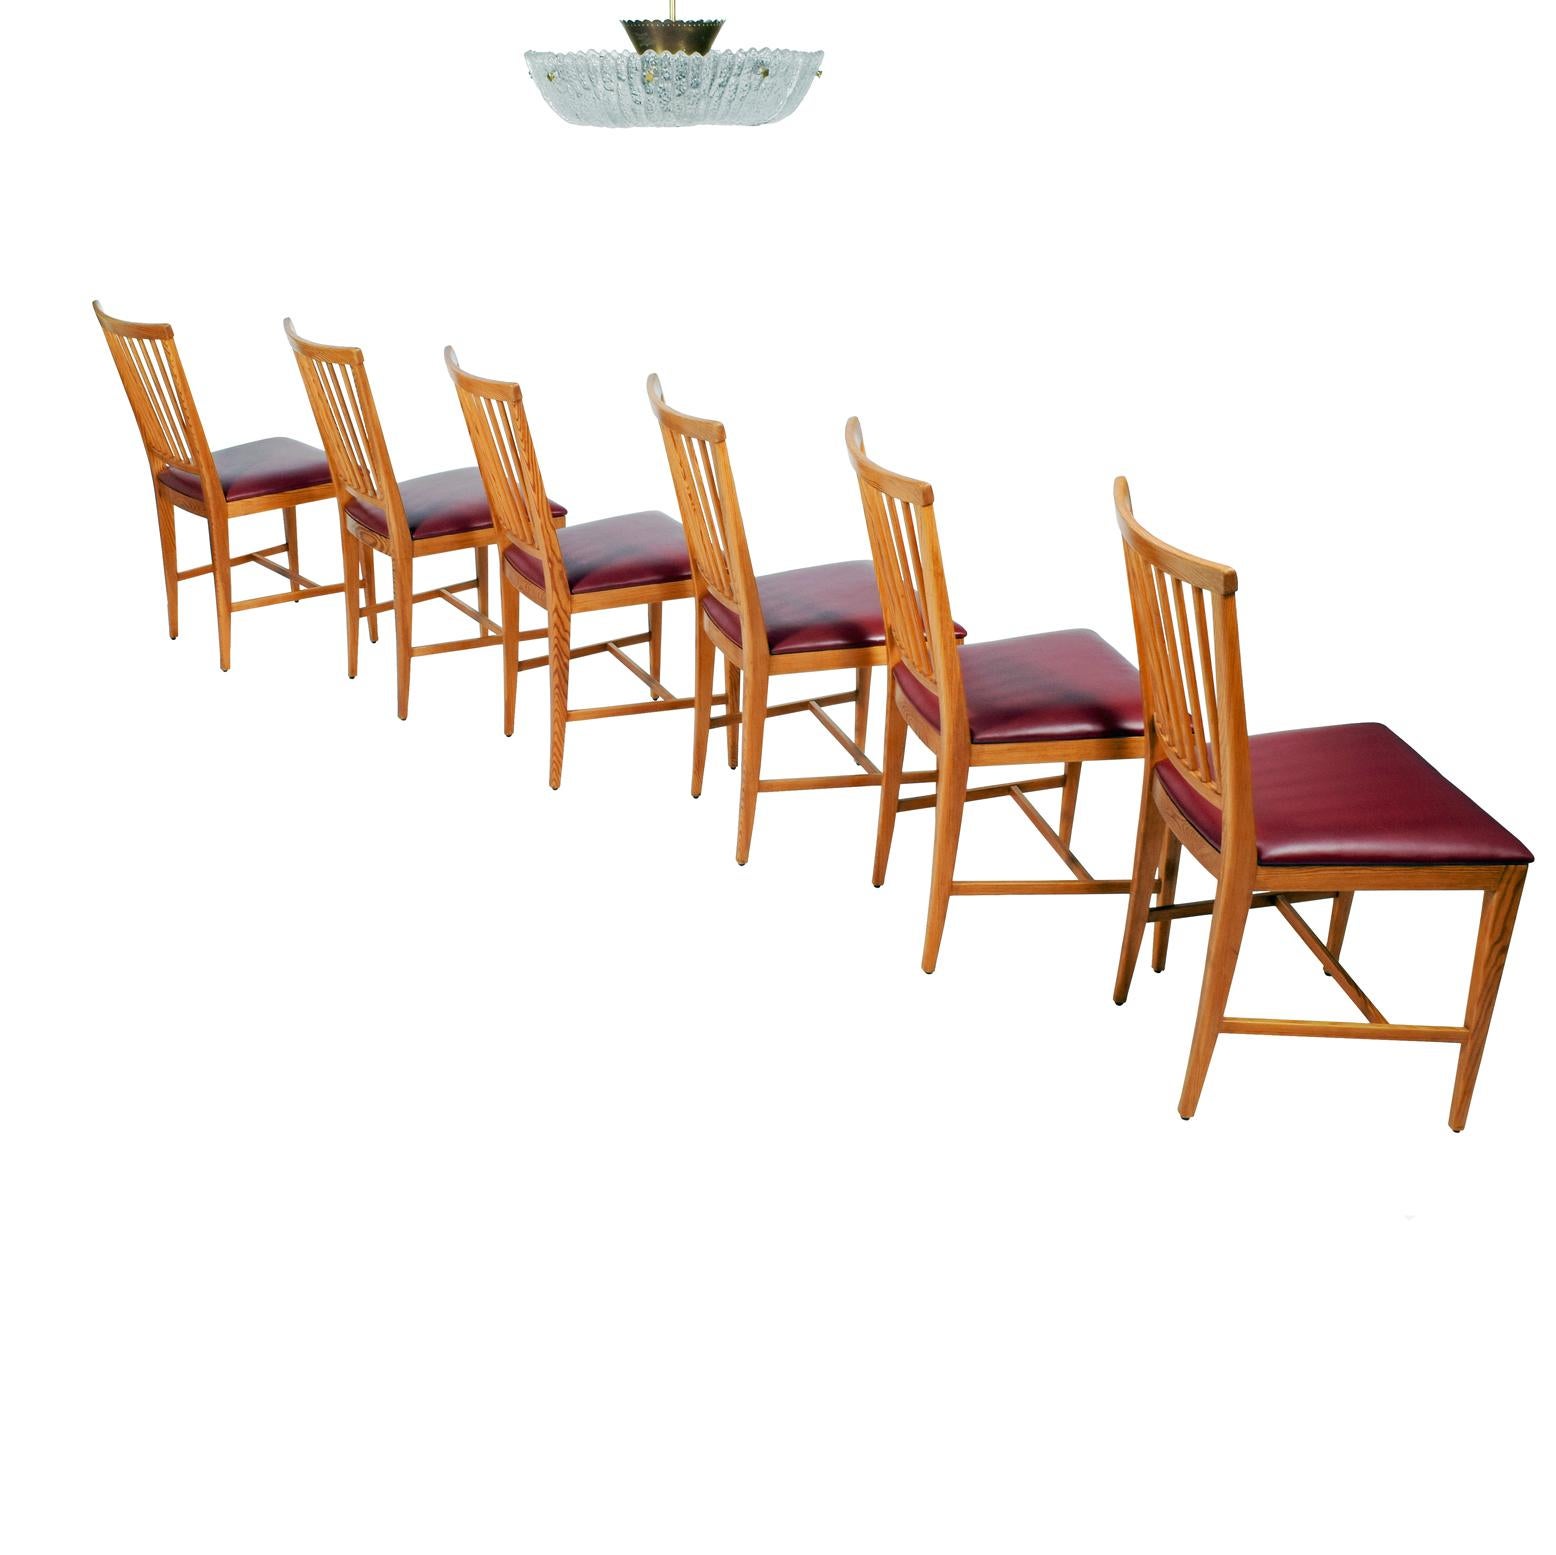 Solid pine everyday chairs design in 1943 for Karl Anderson & Sans leather upholstery marking to each chair CM.